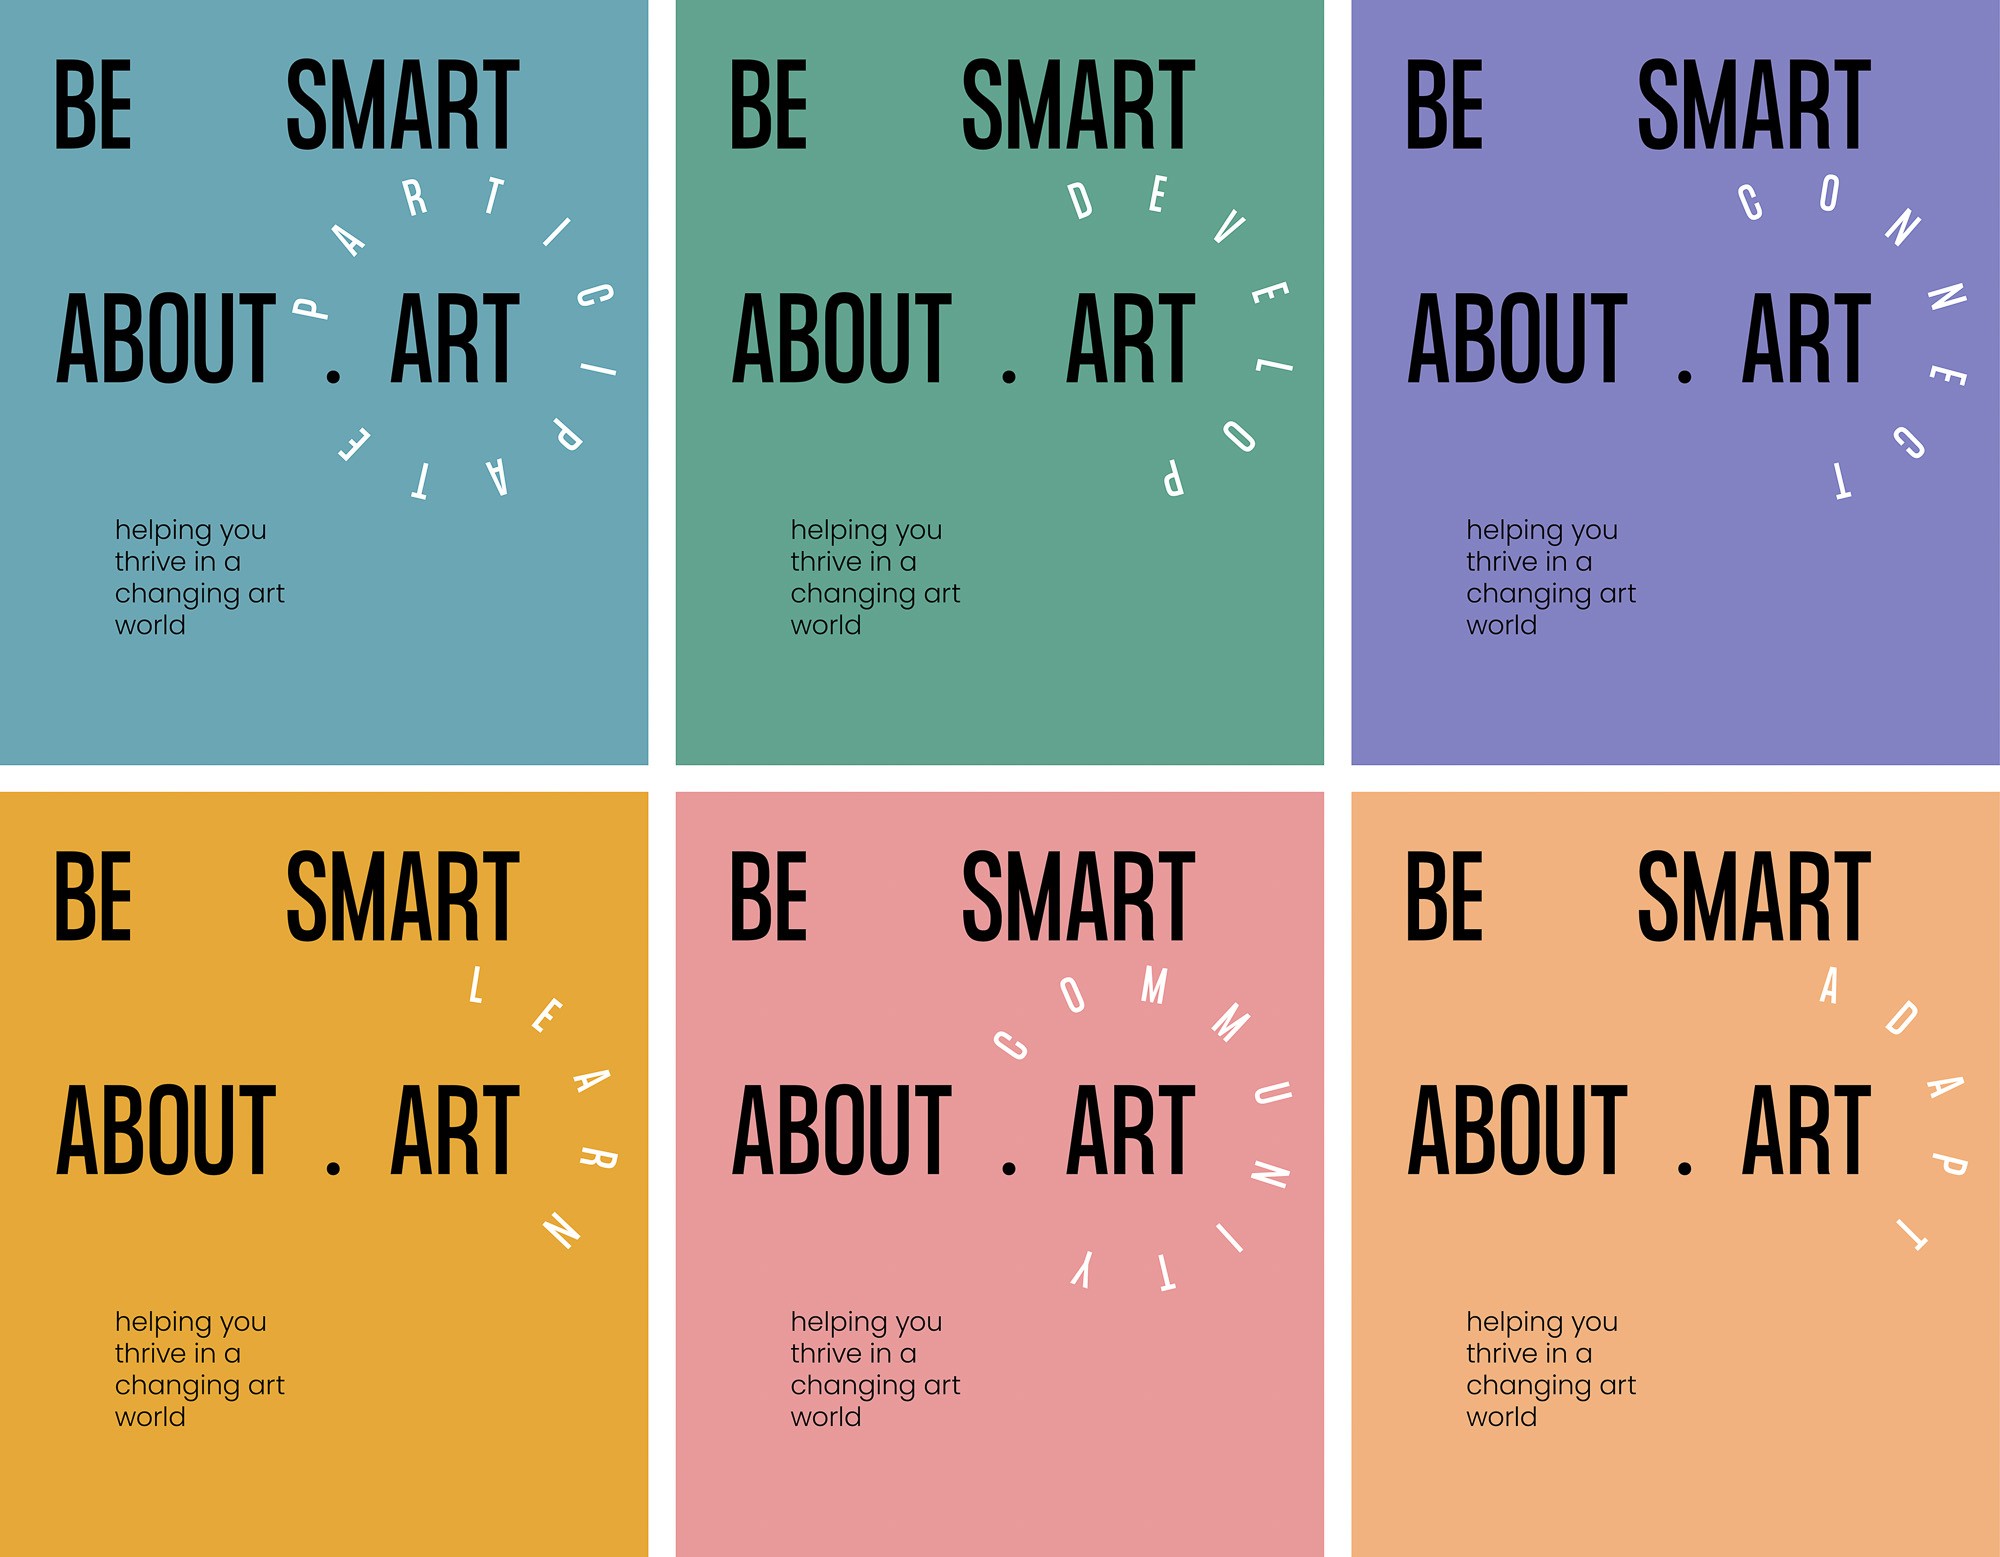 Be Smart About Art